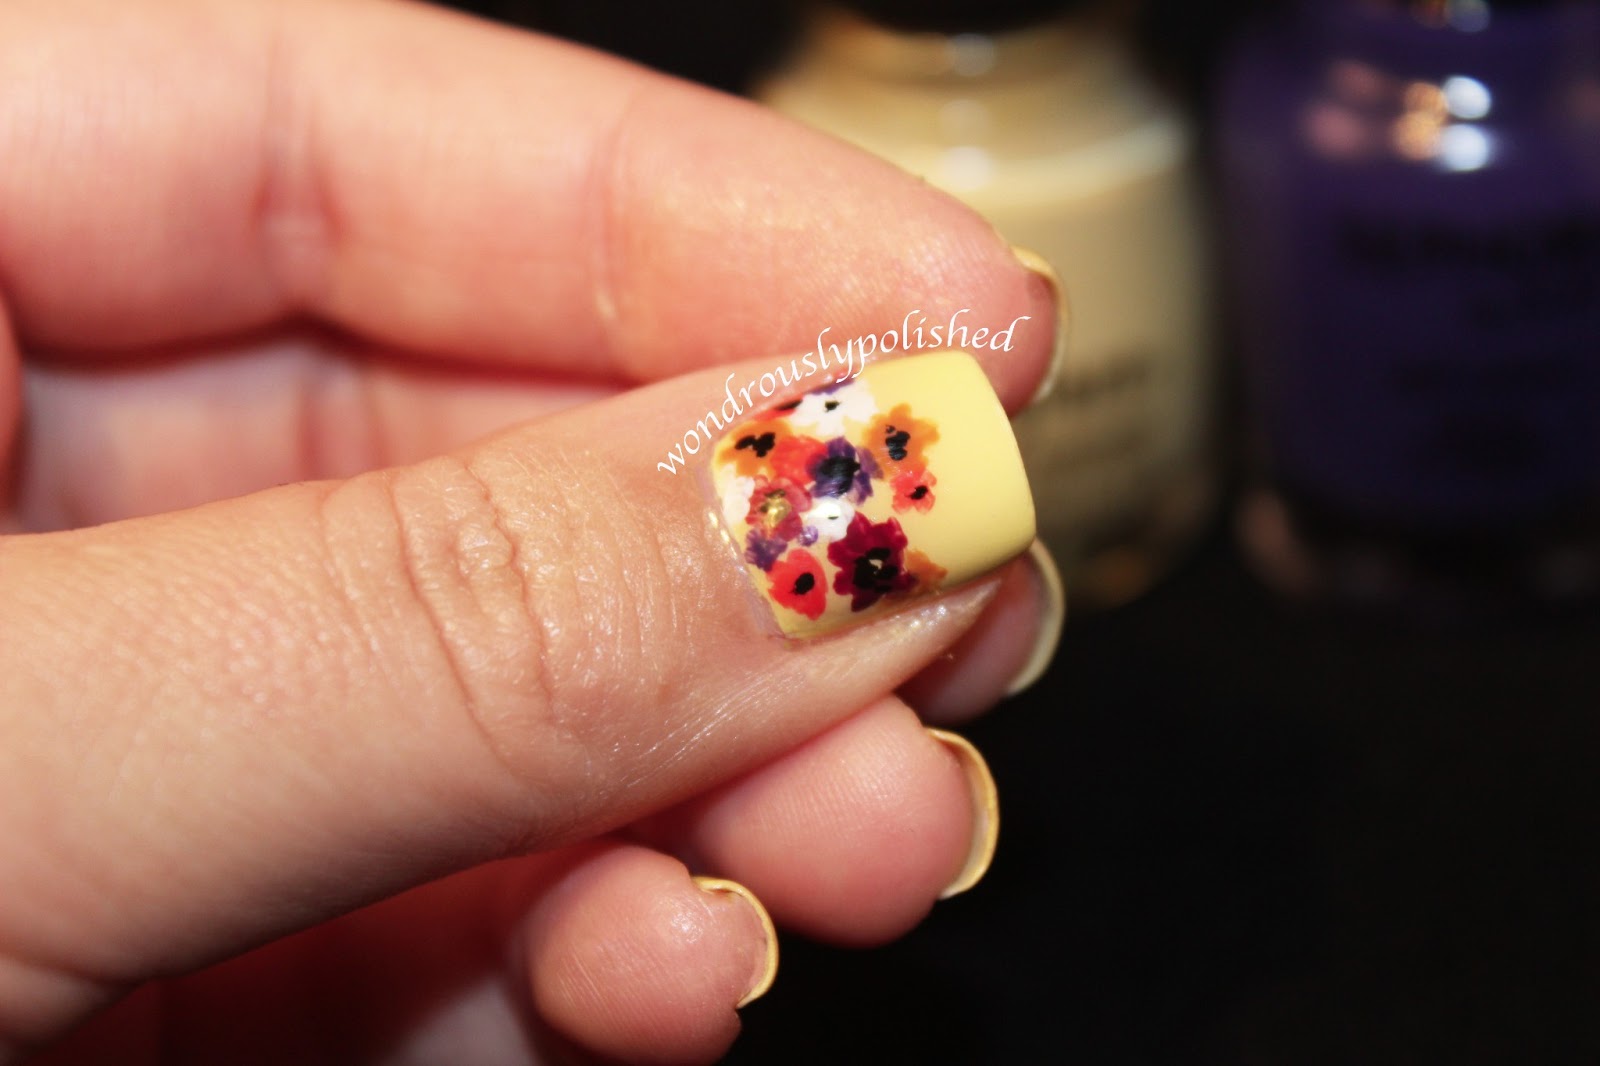 Flower Nail Art at Home - wide 4